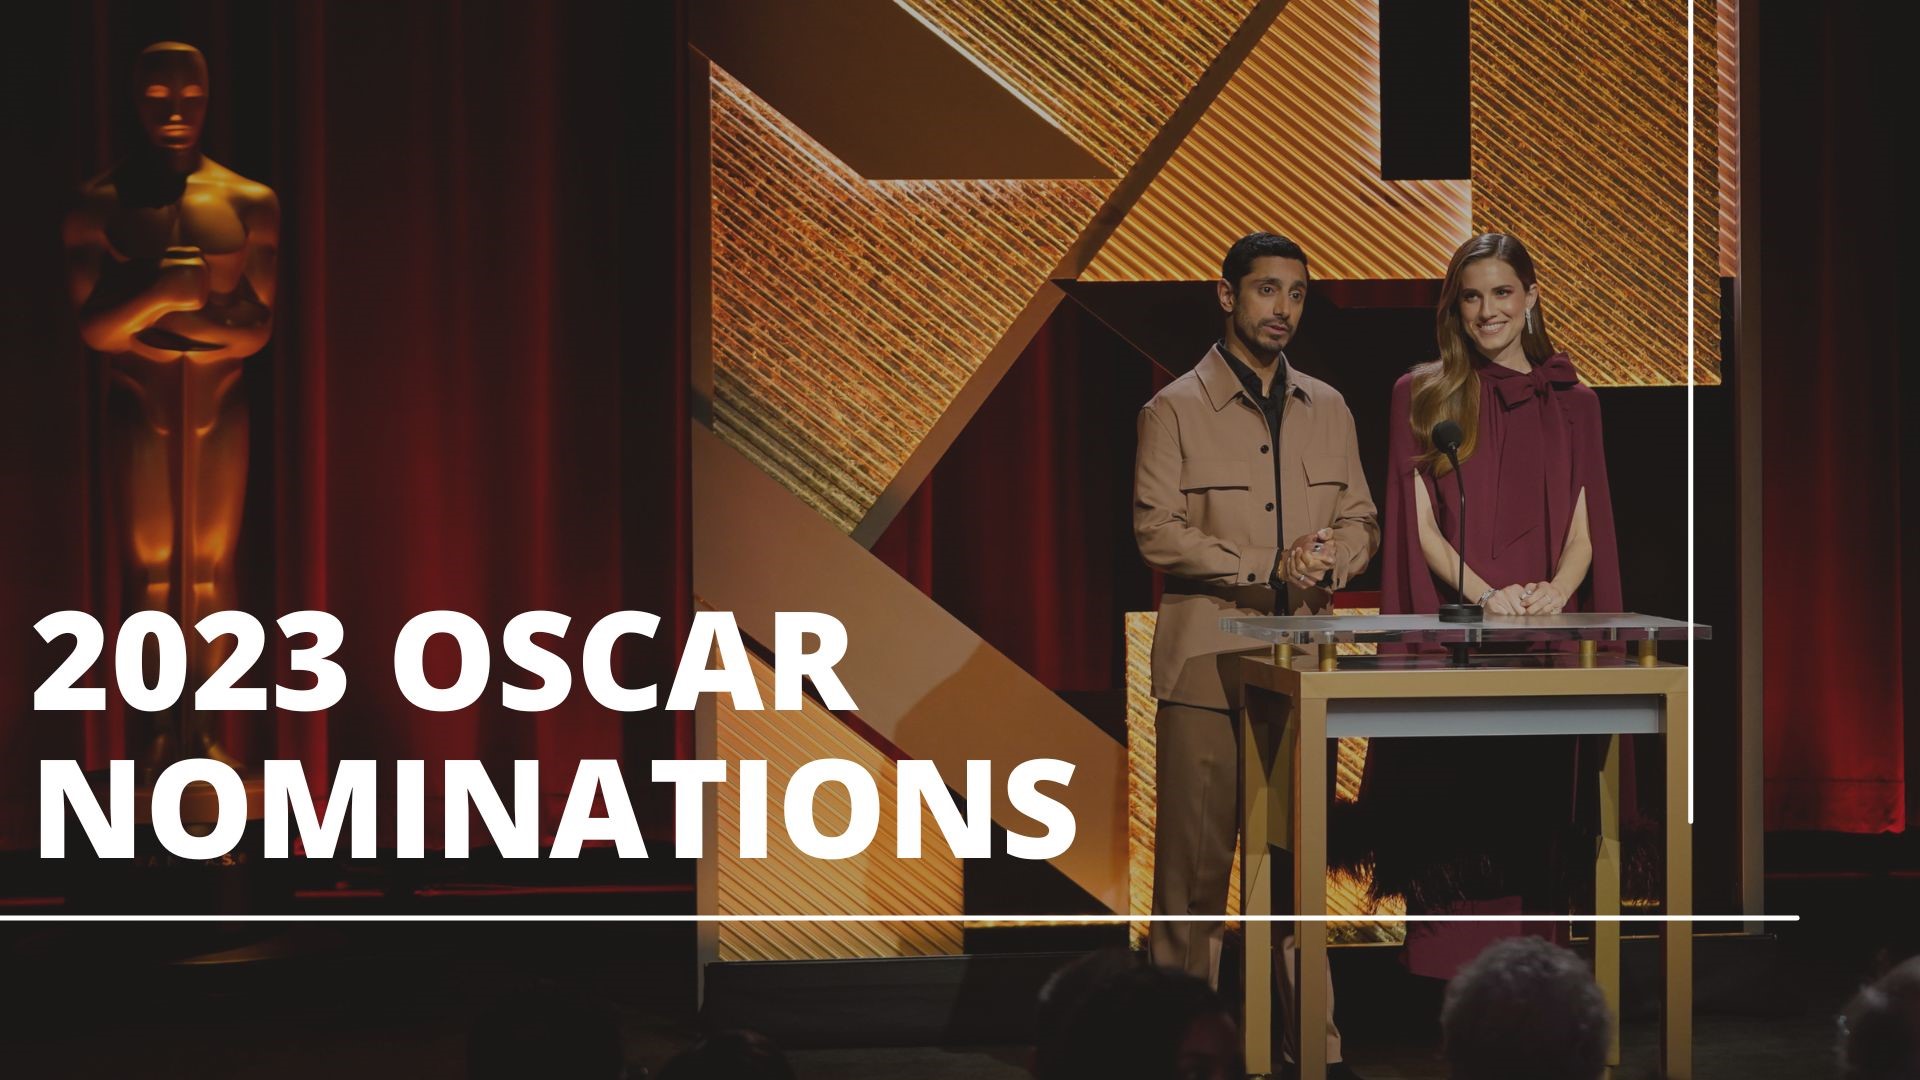 Actors Allison Williams and Riz Ahmed announced the nominees for the 2023 Oscars. The 95th Academy Awards are scheduled for March 12, 2023.